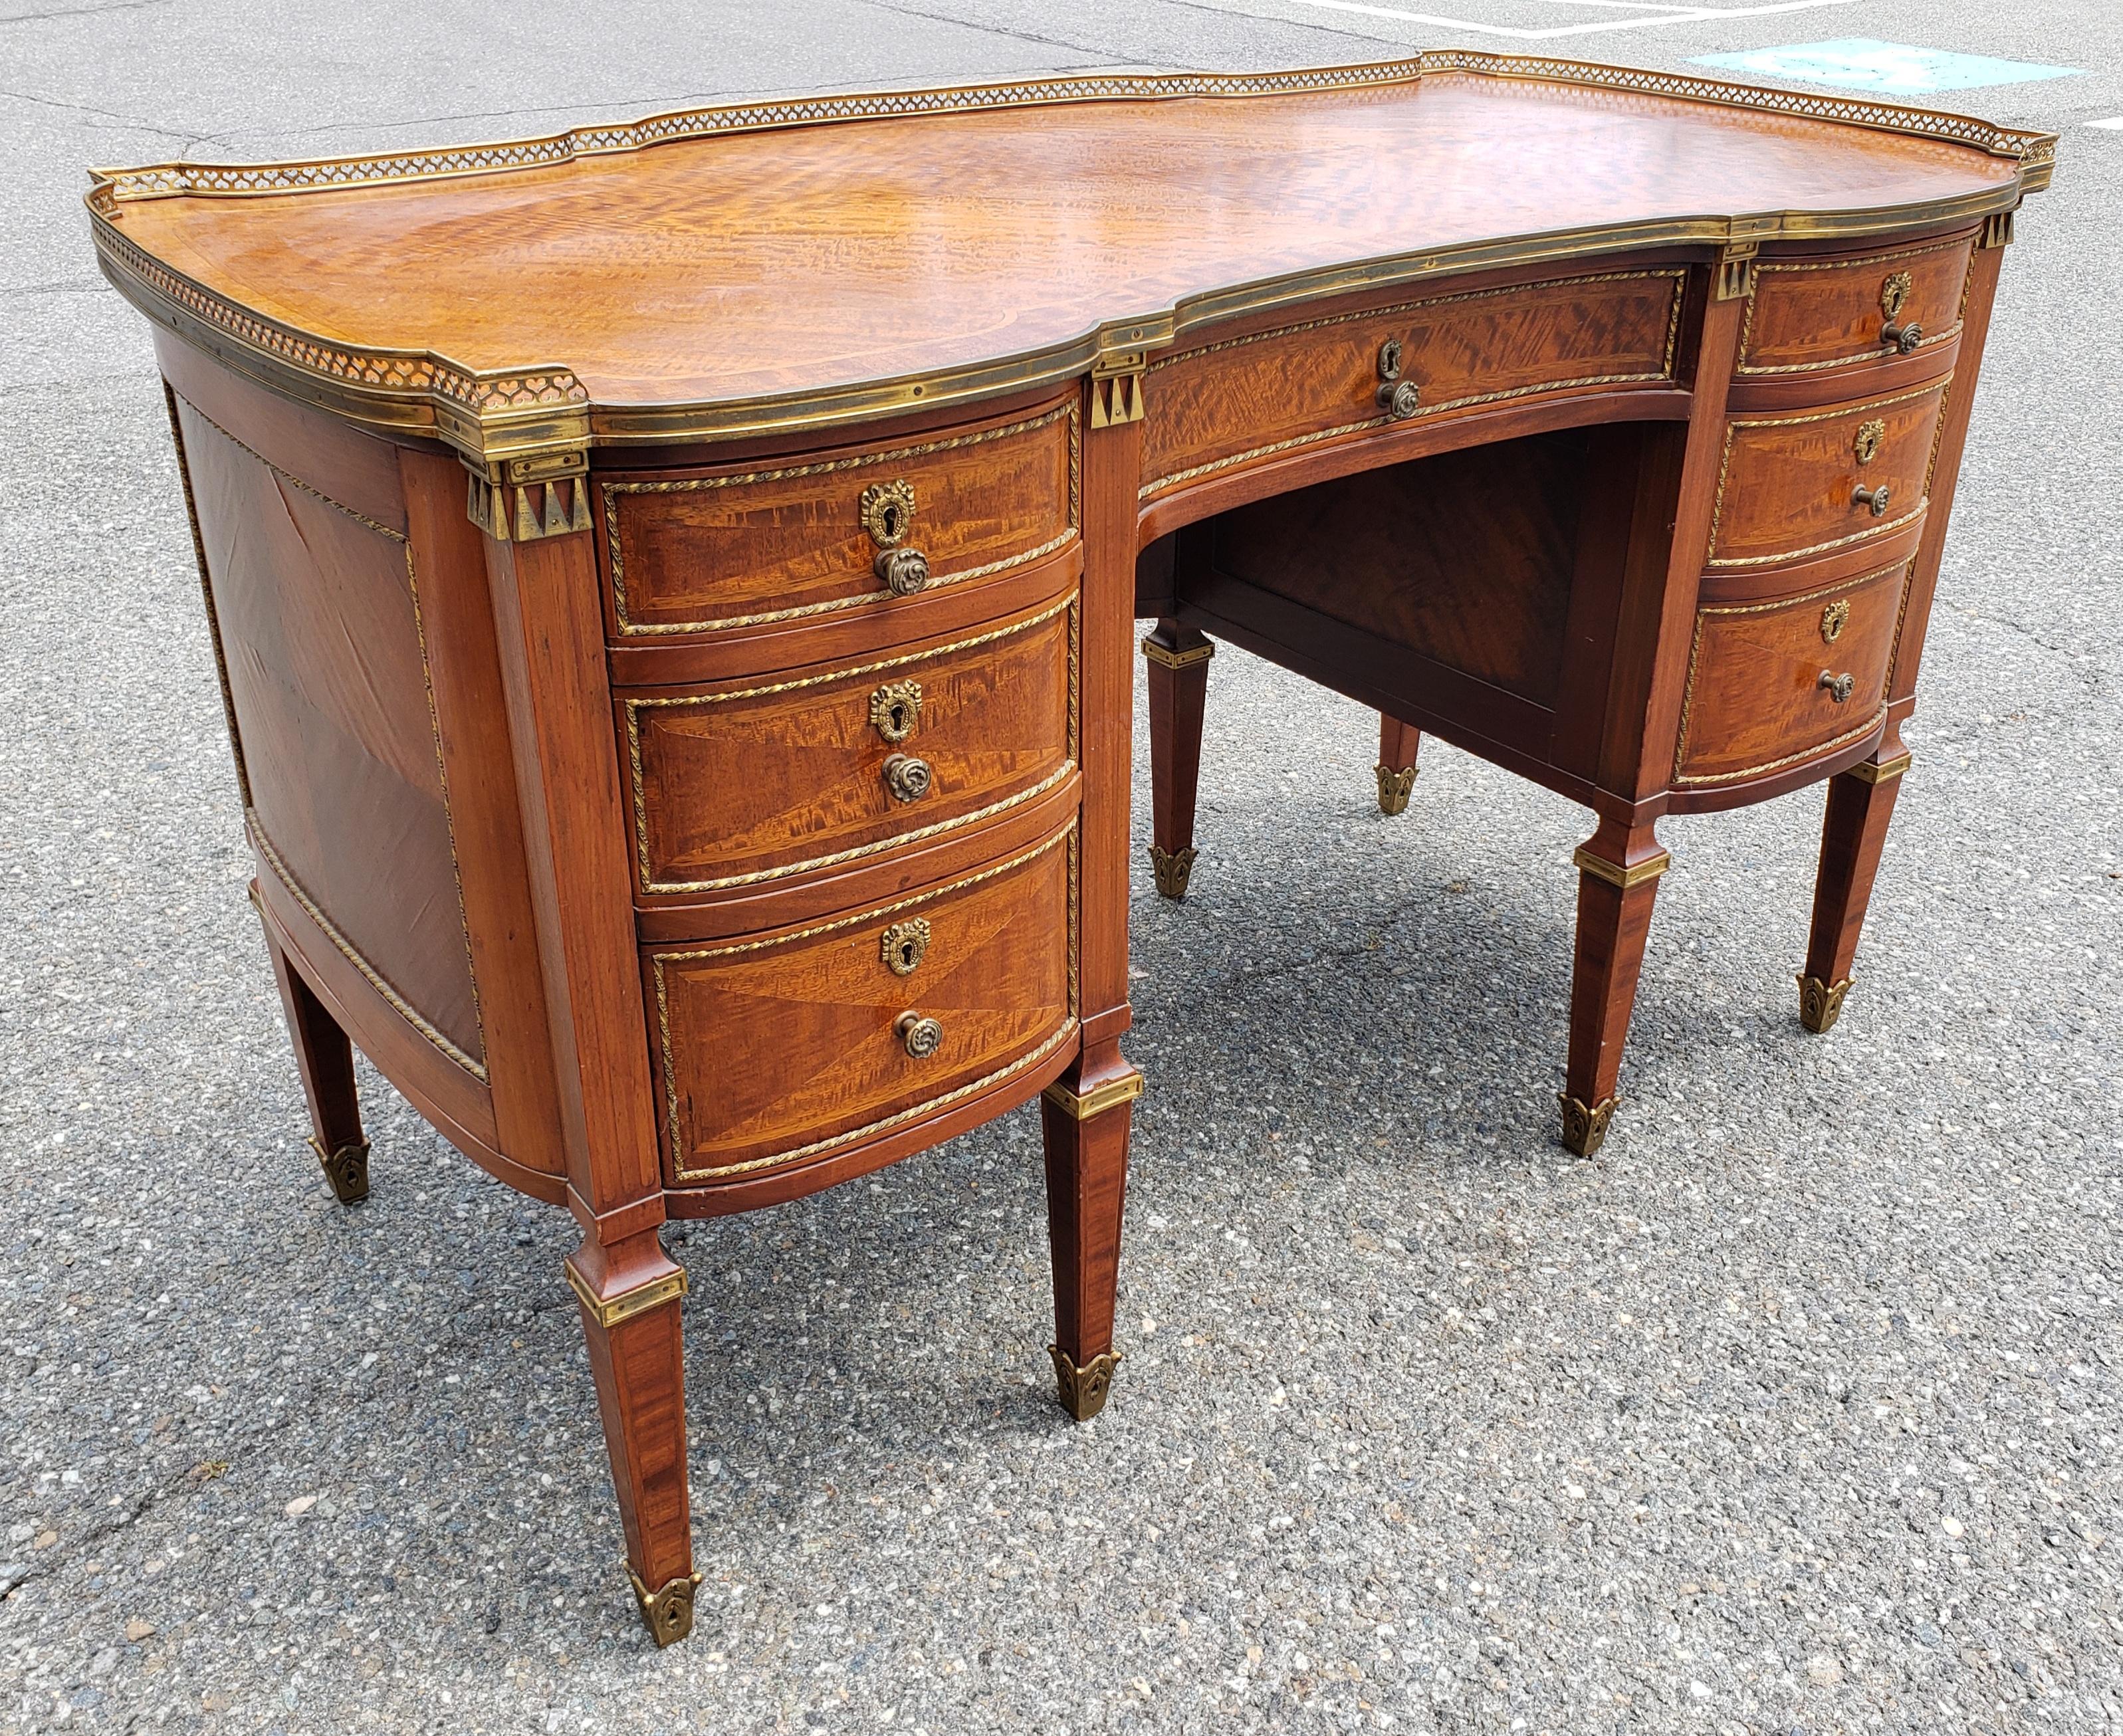 Louis XVI Style Ormolu Mounted Galleried Mahogany Burl and Marquetry Desk  For Sale 2